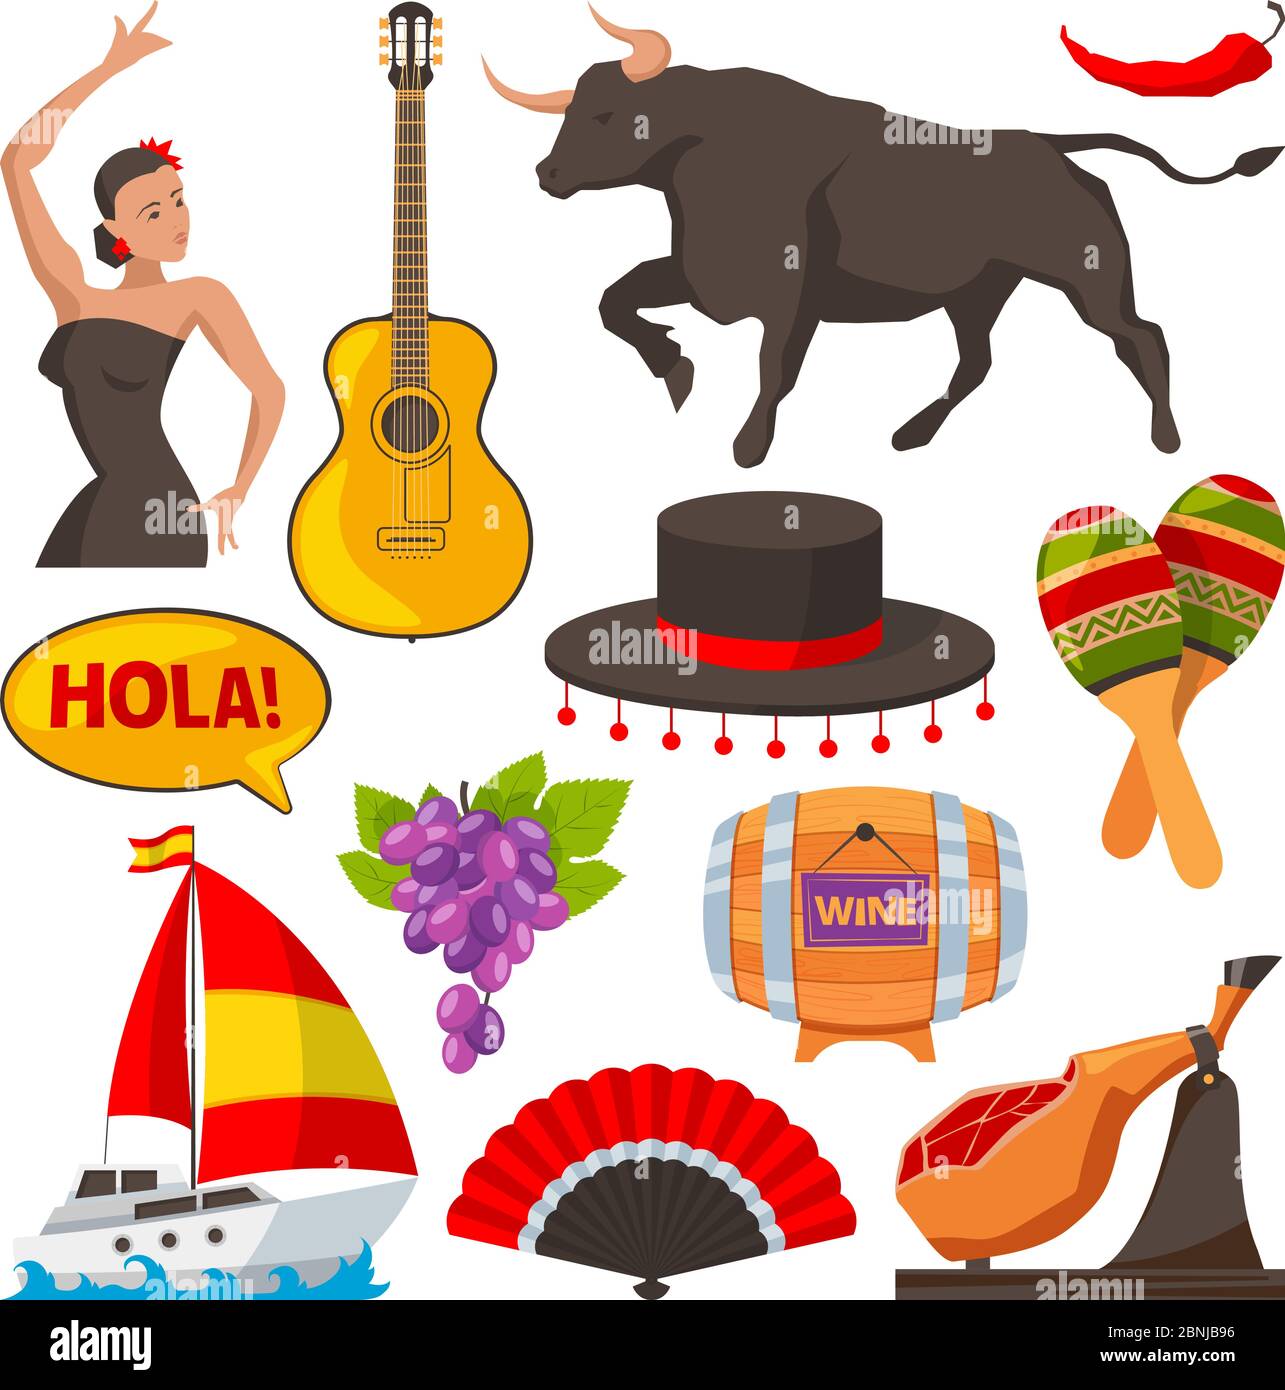 Travel pictures of spain cultural objects. Cartoon style illustrations isolate Stock Vector